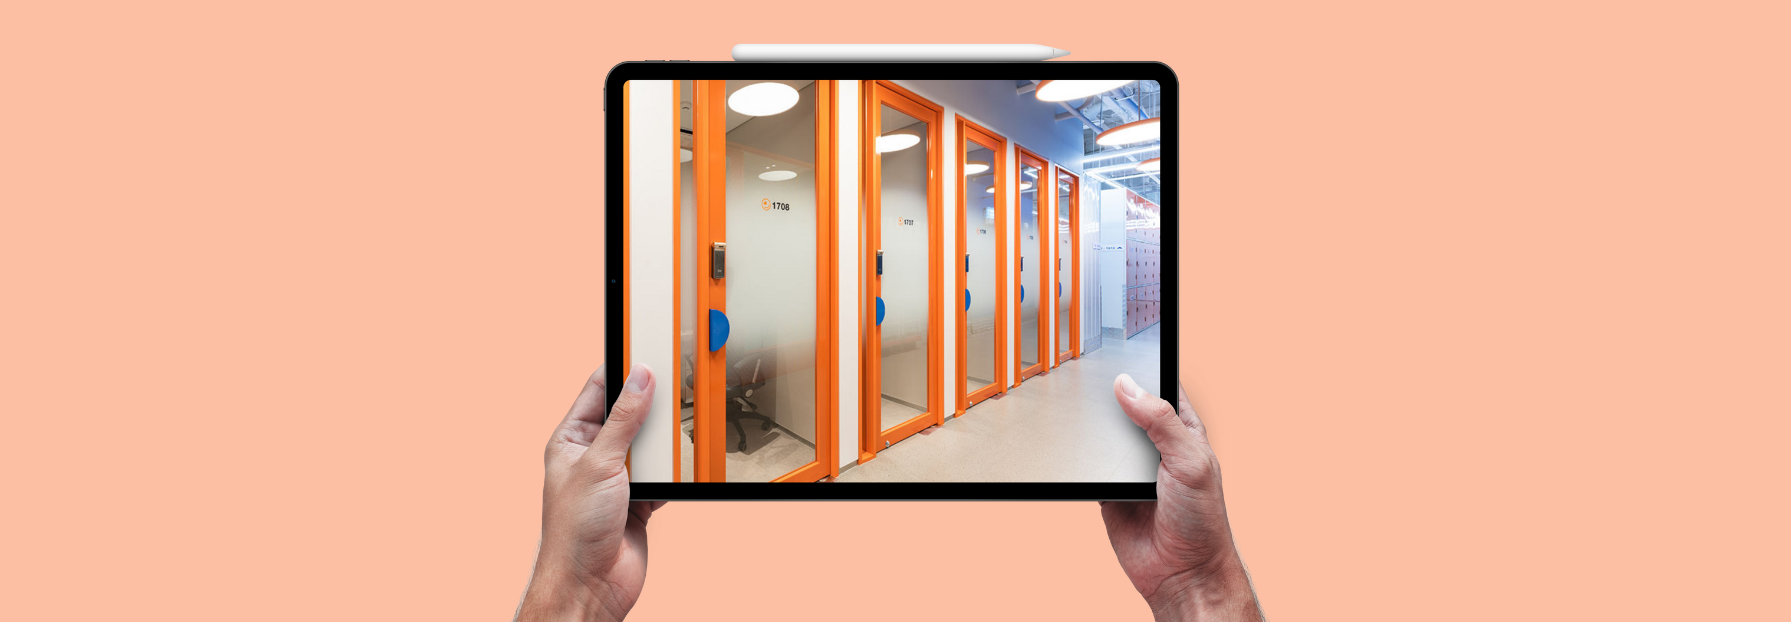 person holding a tablet with a photo of storage facility doors